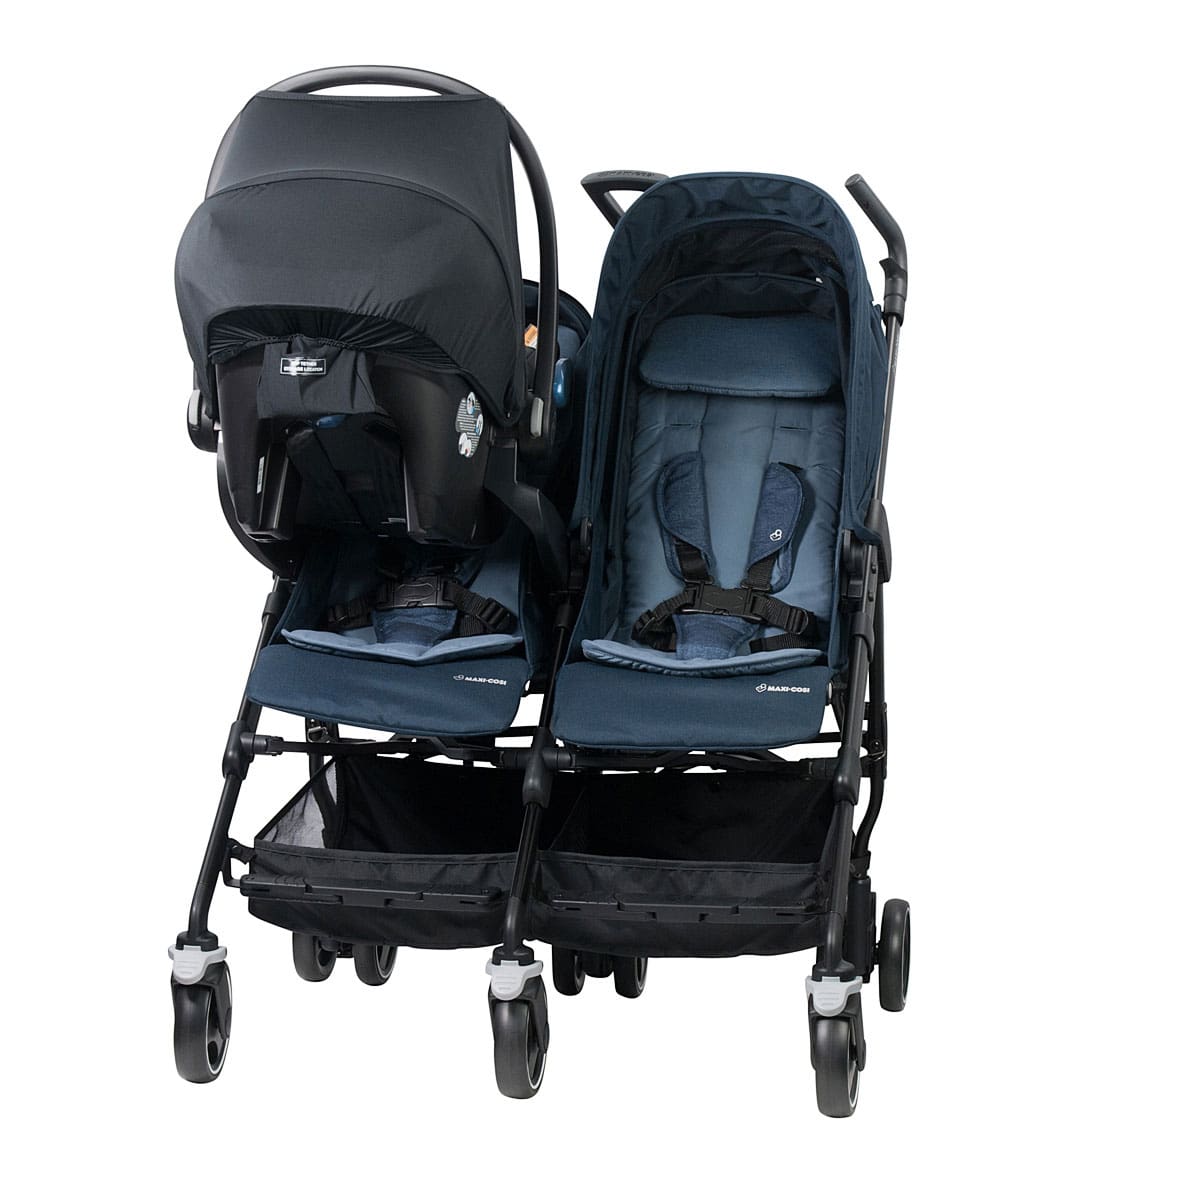 Maxi-Cosi Dana For2 Twin Stroller can be customized with baby capsules